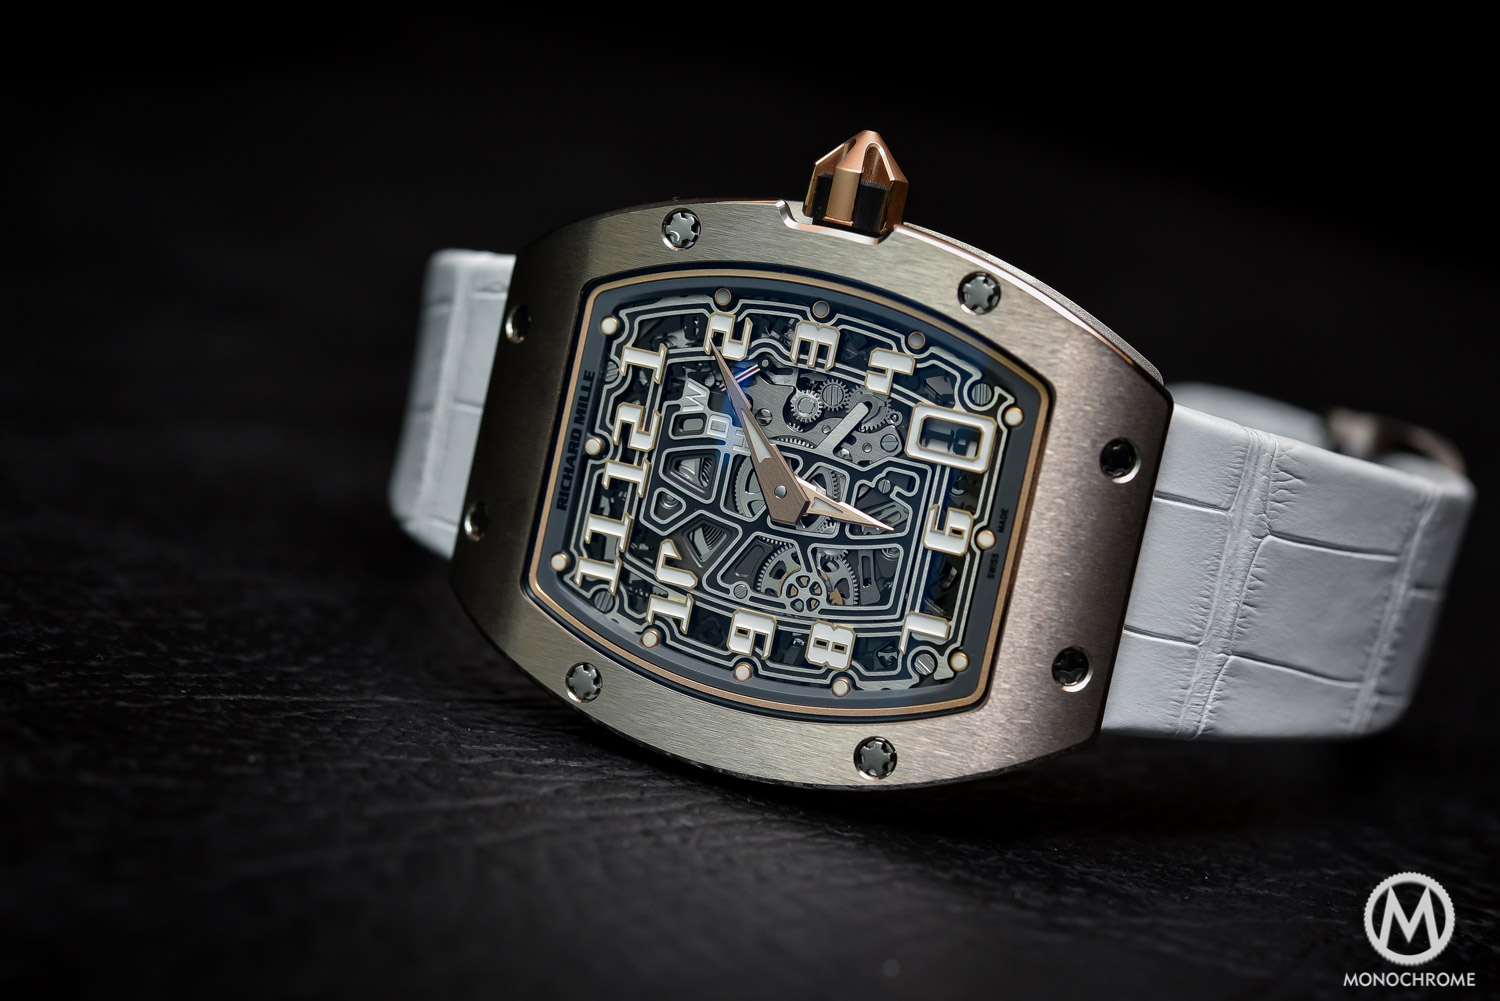 Richard Mille RM 67-01 Automatic Extra Flat white gold - SIHH 2016